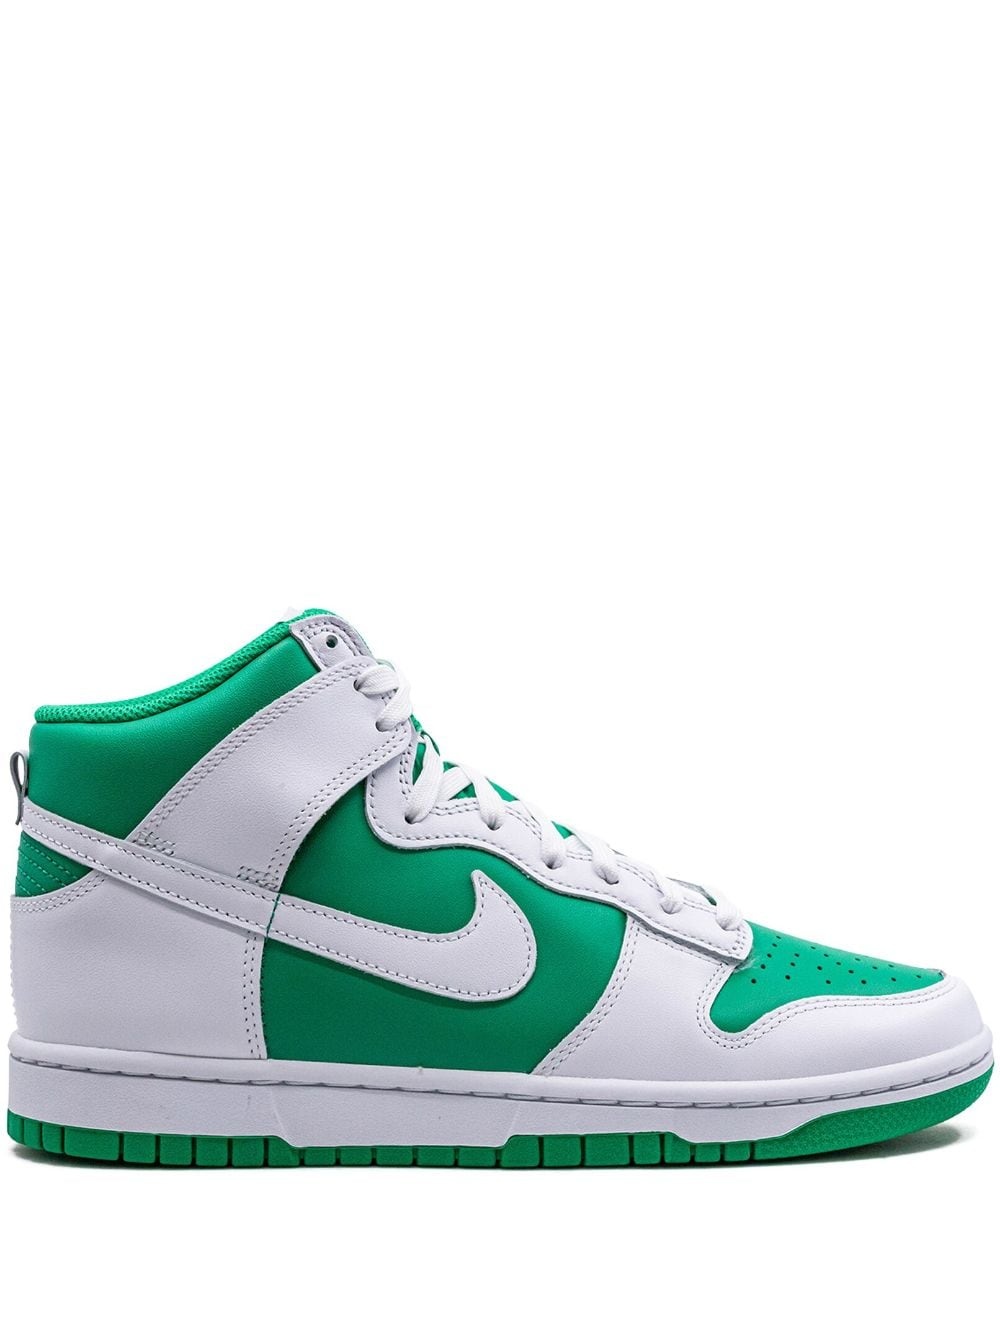 Dunk High "Pine Green White" sneakers - 1